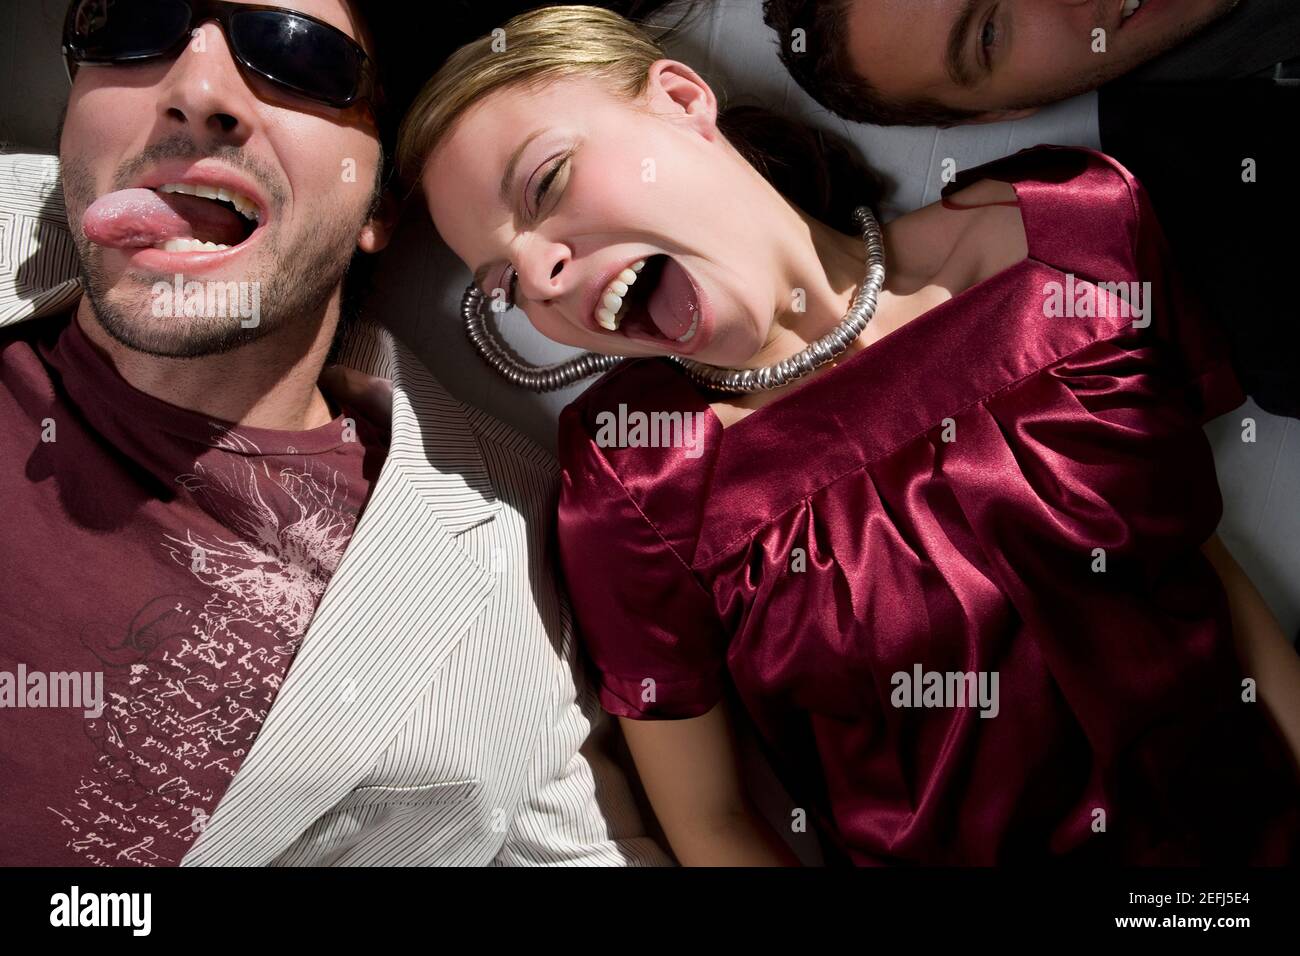 High angle view of a young woman lying down with a young man sticking his tongue out Stock Photo